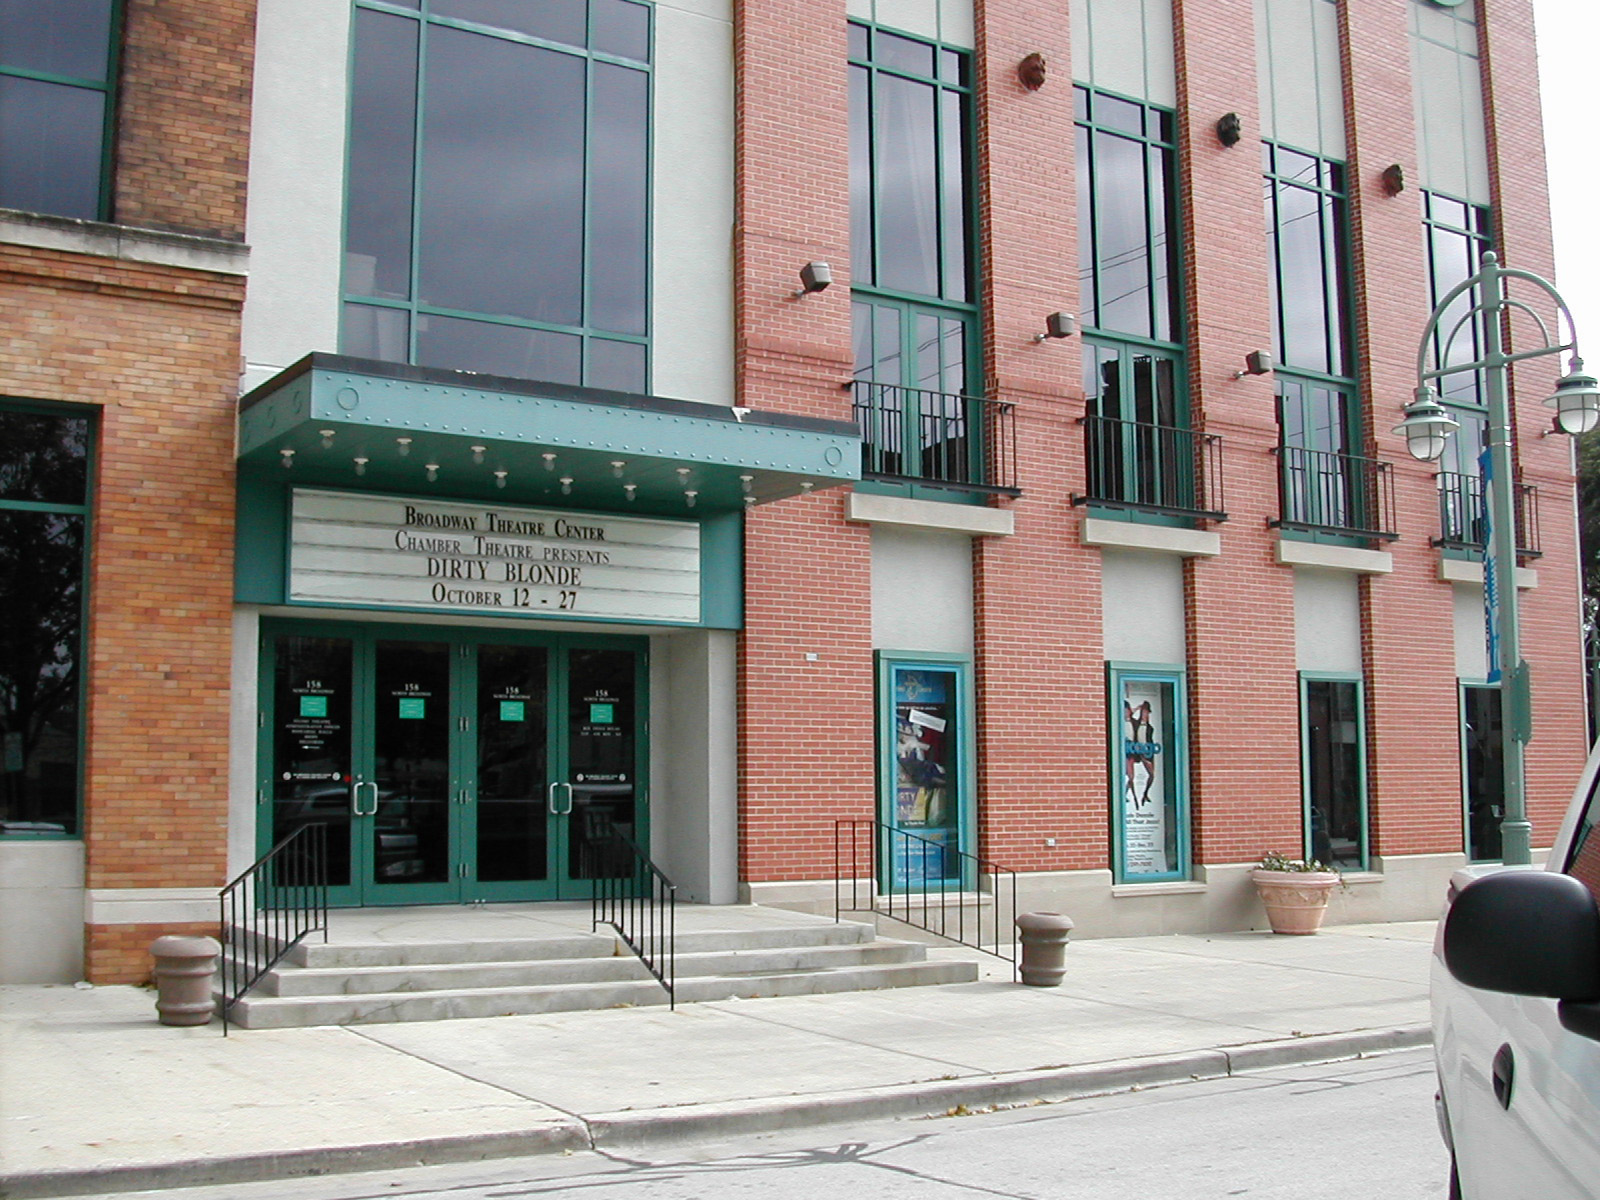 The Broadway Theatre Center houses three performing arts companies in the Third Ward. The Third Ward has become a hub for the arts. Photo by Tara Domine.